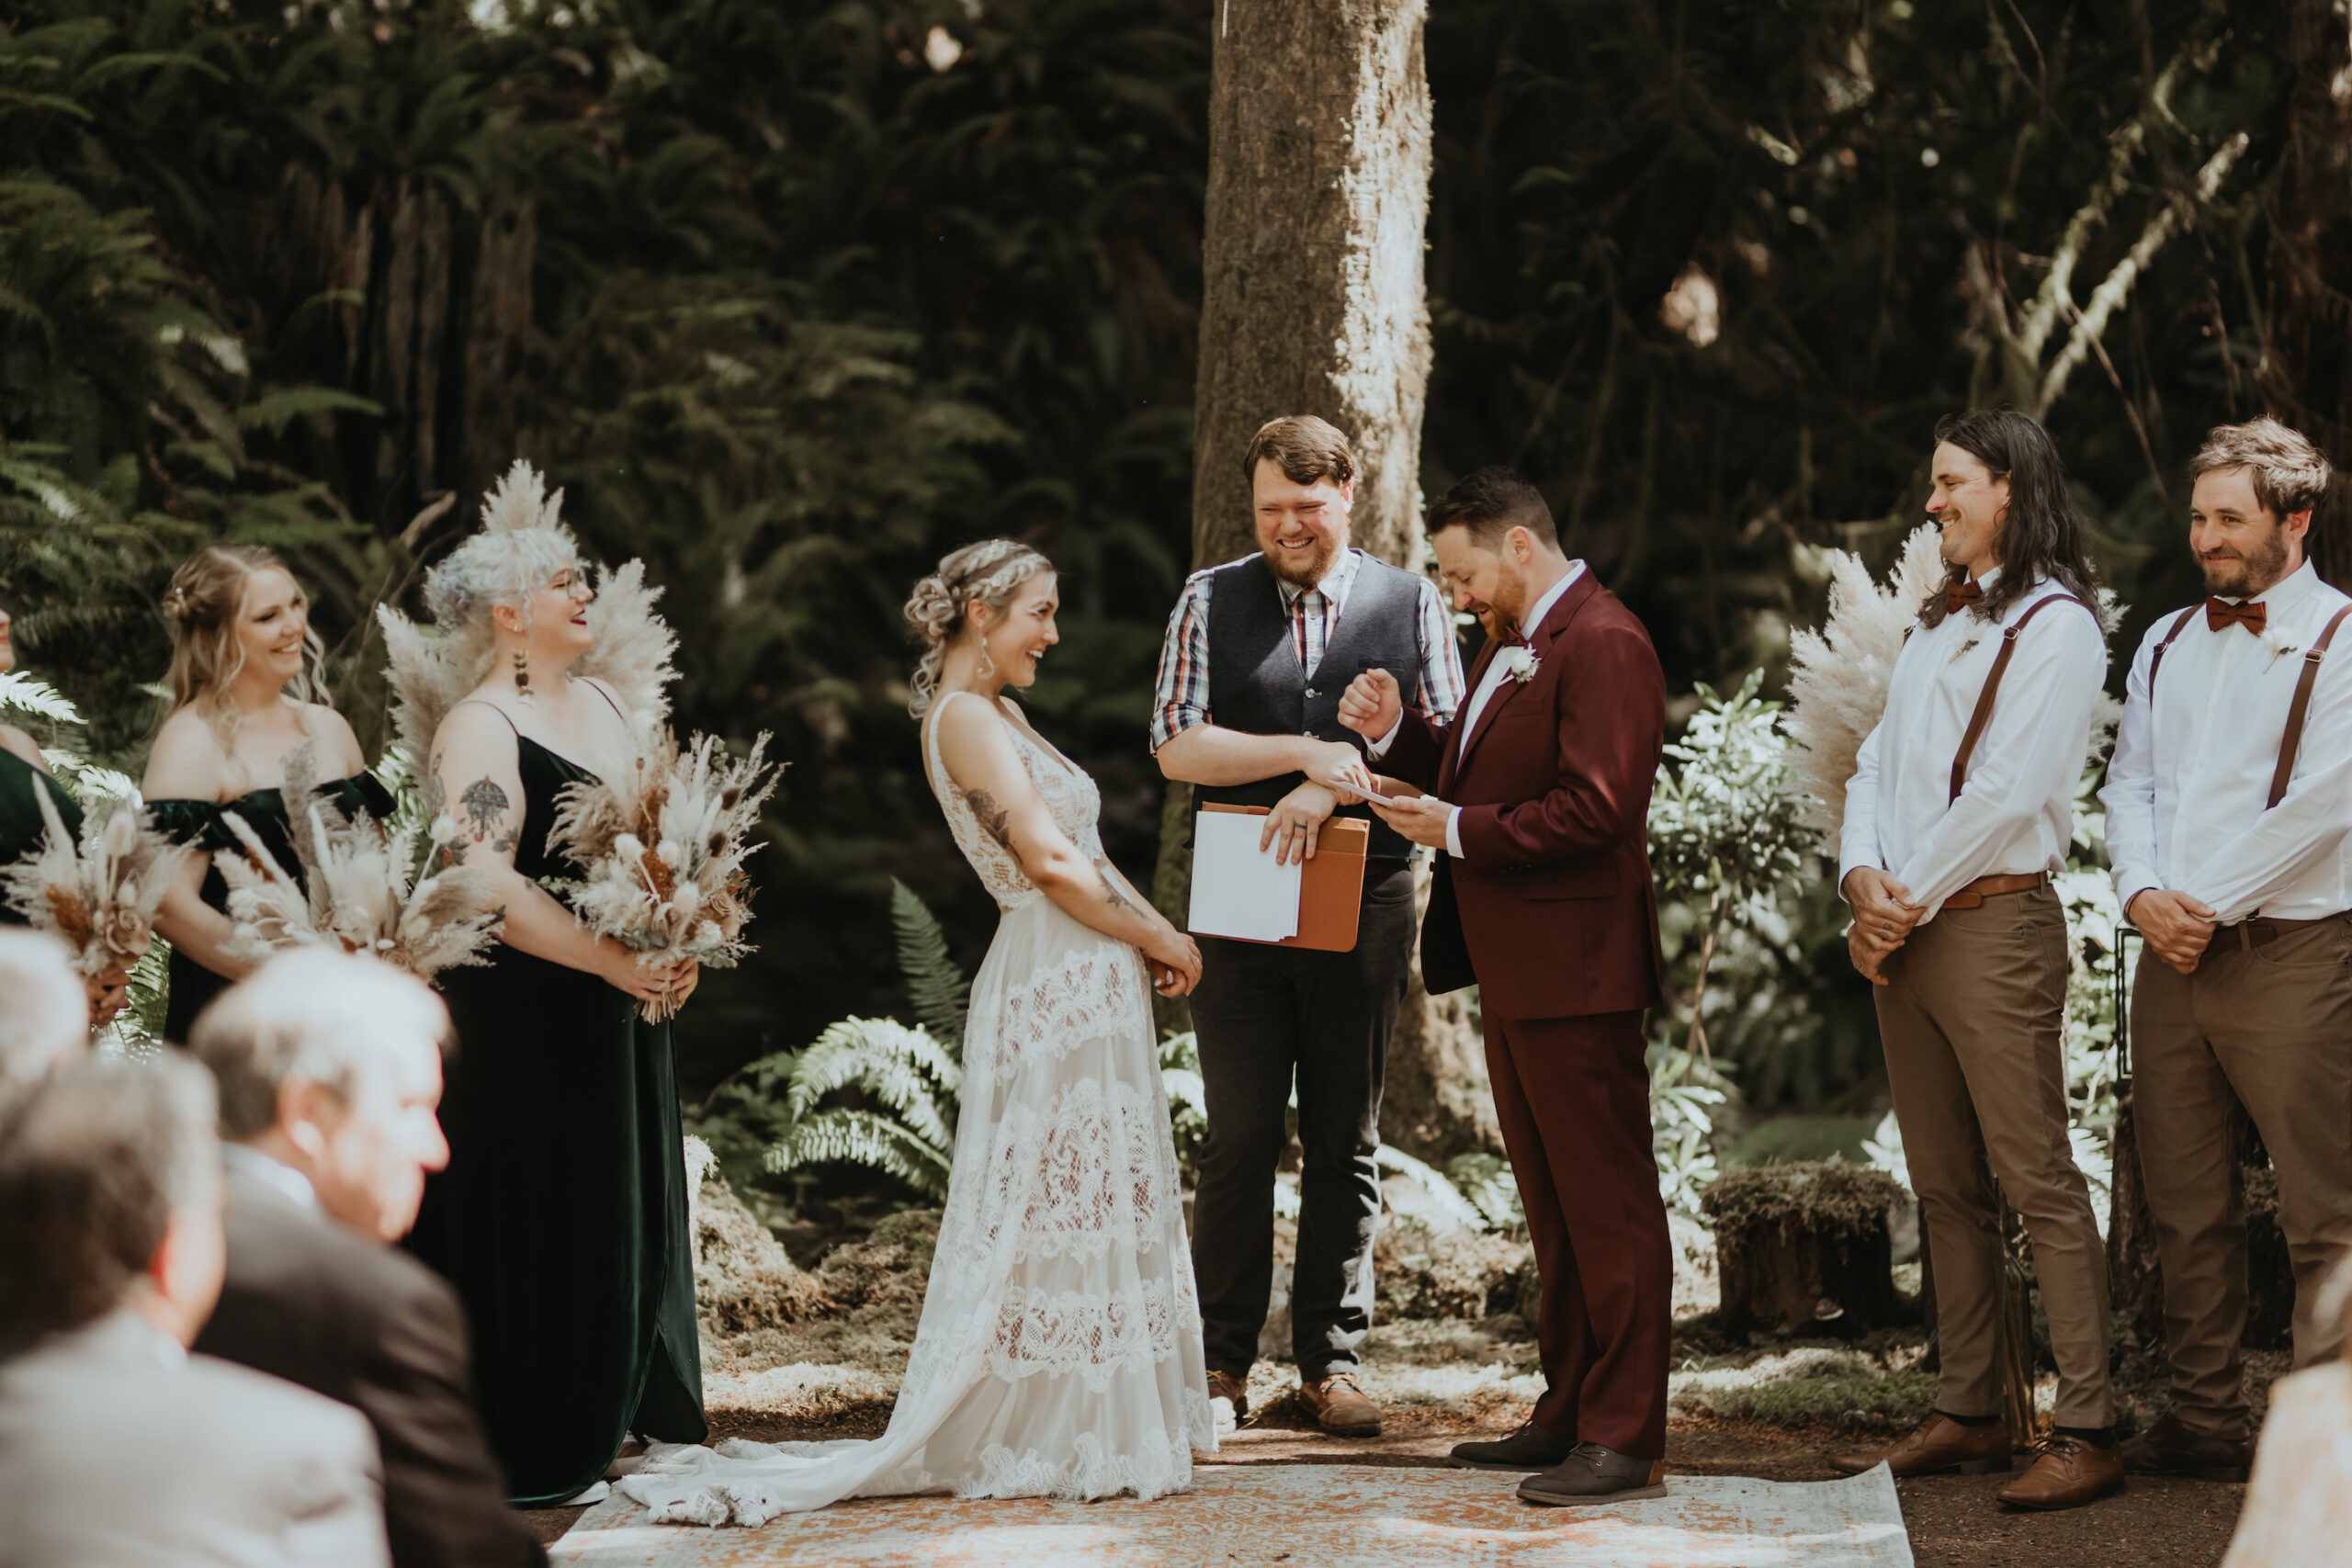 Cedar Haven wedding officiated by Victoria wedding officiant Jordan with Young Hip & Married